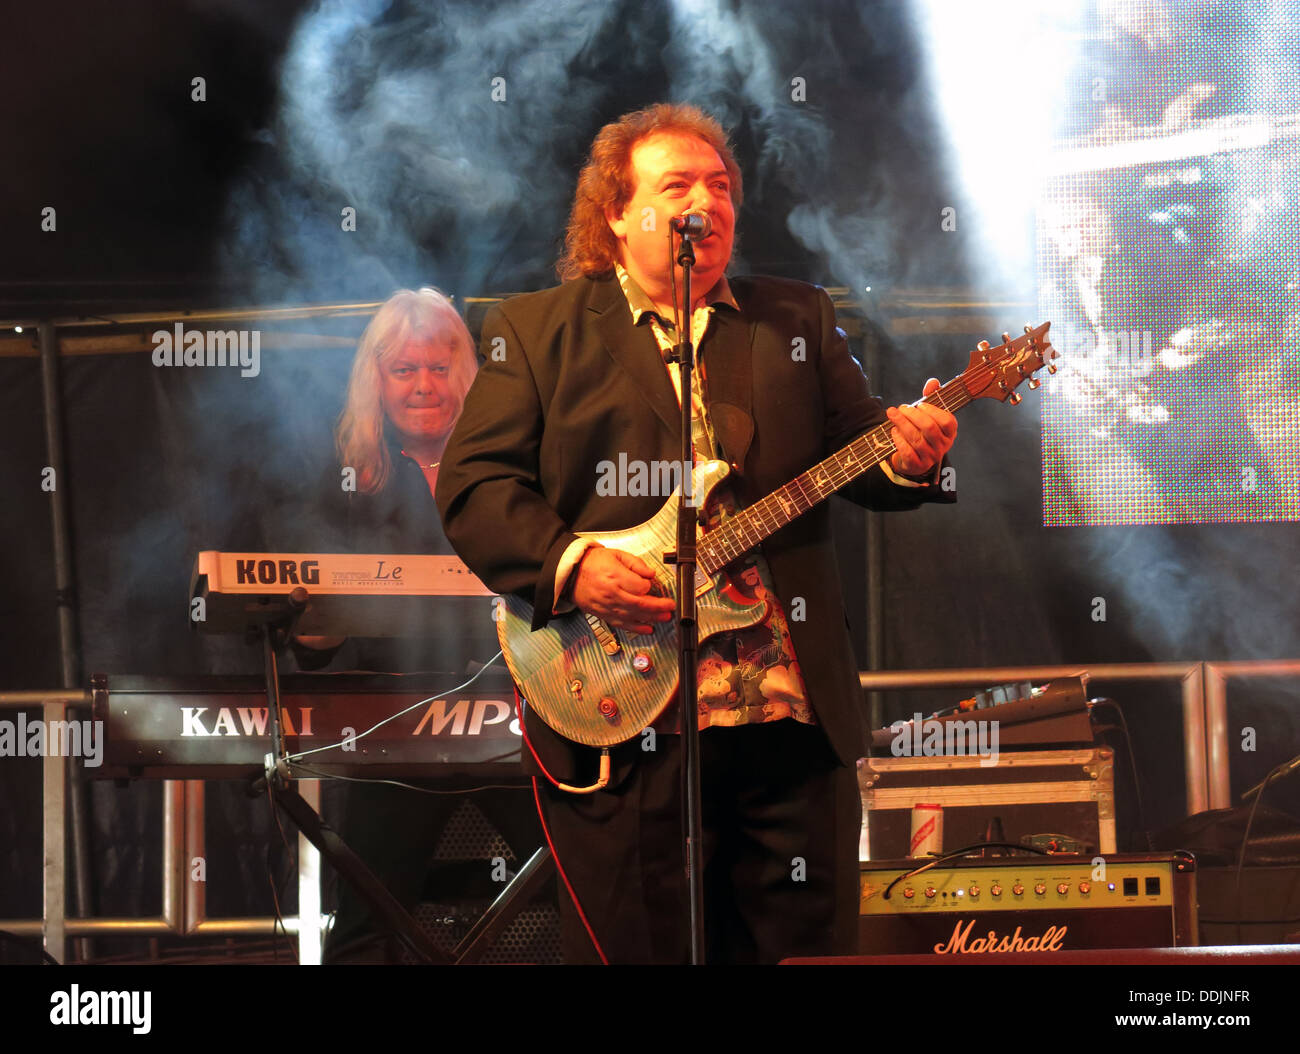 Bernie Marsden of Whitesnake at Silverstone 2013 British GP Grand Prix Woodlands stage with his guitar Stock Photo